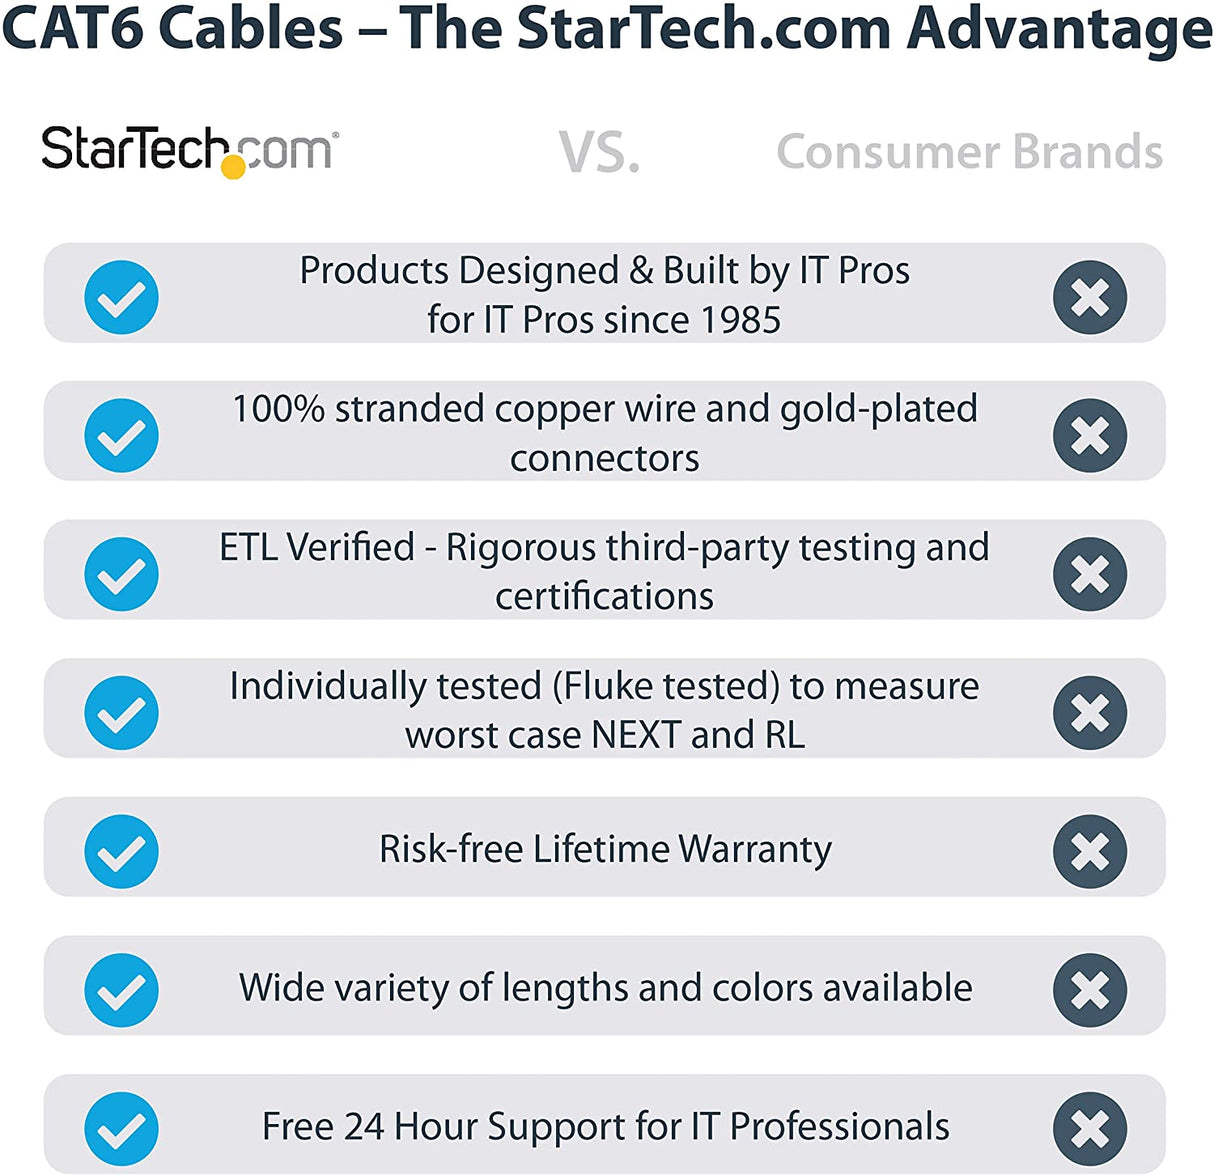 StarTech.com 2ft CAT6 Ethernet Cable - Green CAT 6 Gigabit Ethernet Wire -650MHz 100W PoE++ RJ45 UTP Molded Category 6 Network/Patch Cord w/Strain Relief/Fluke Tested UL/TIA Certified (C6PATCH2GN) Green 2 ft / 0.6 m 1 Pack